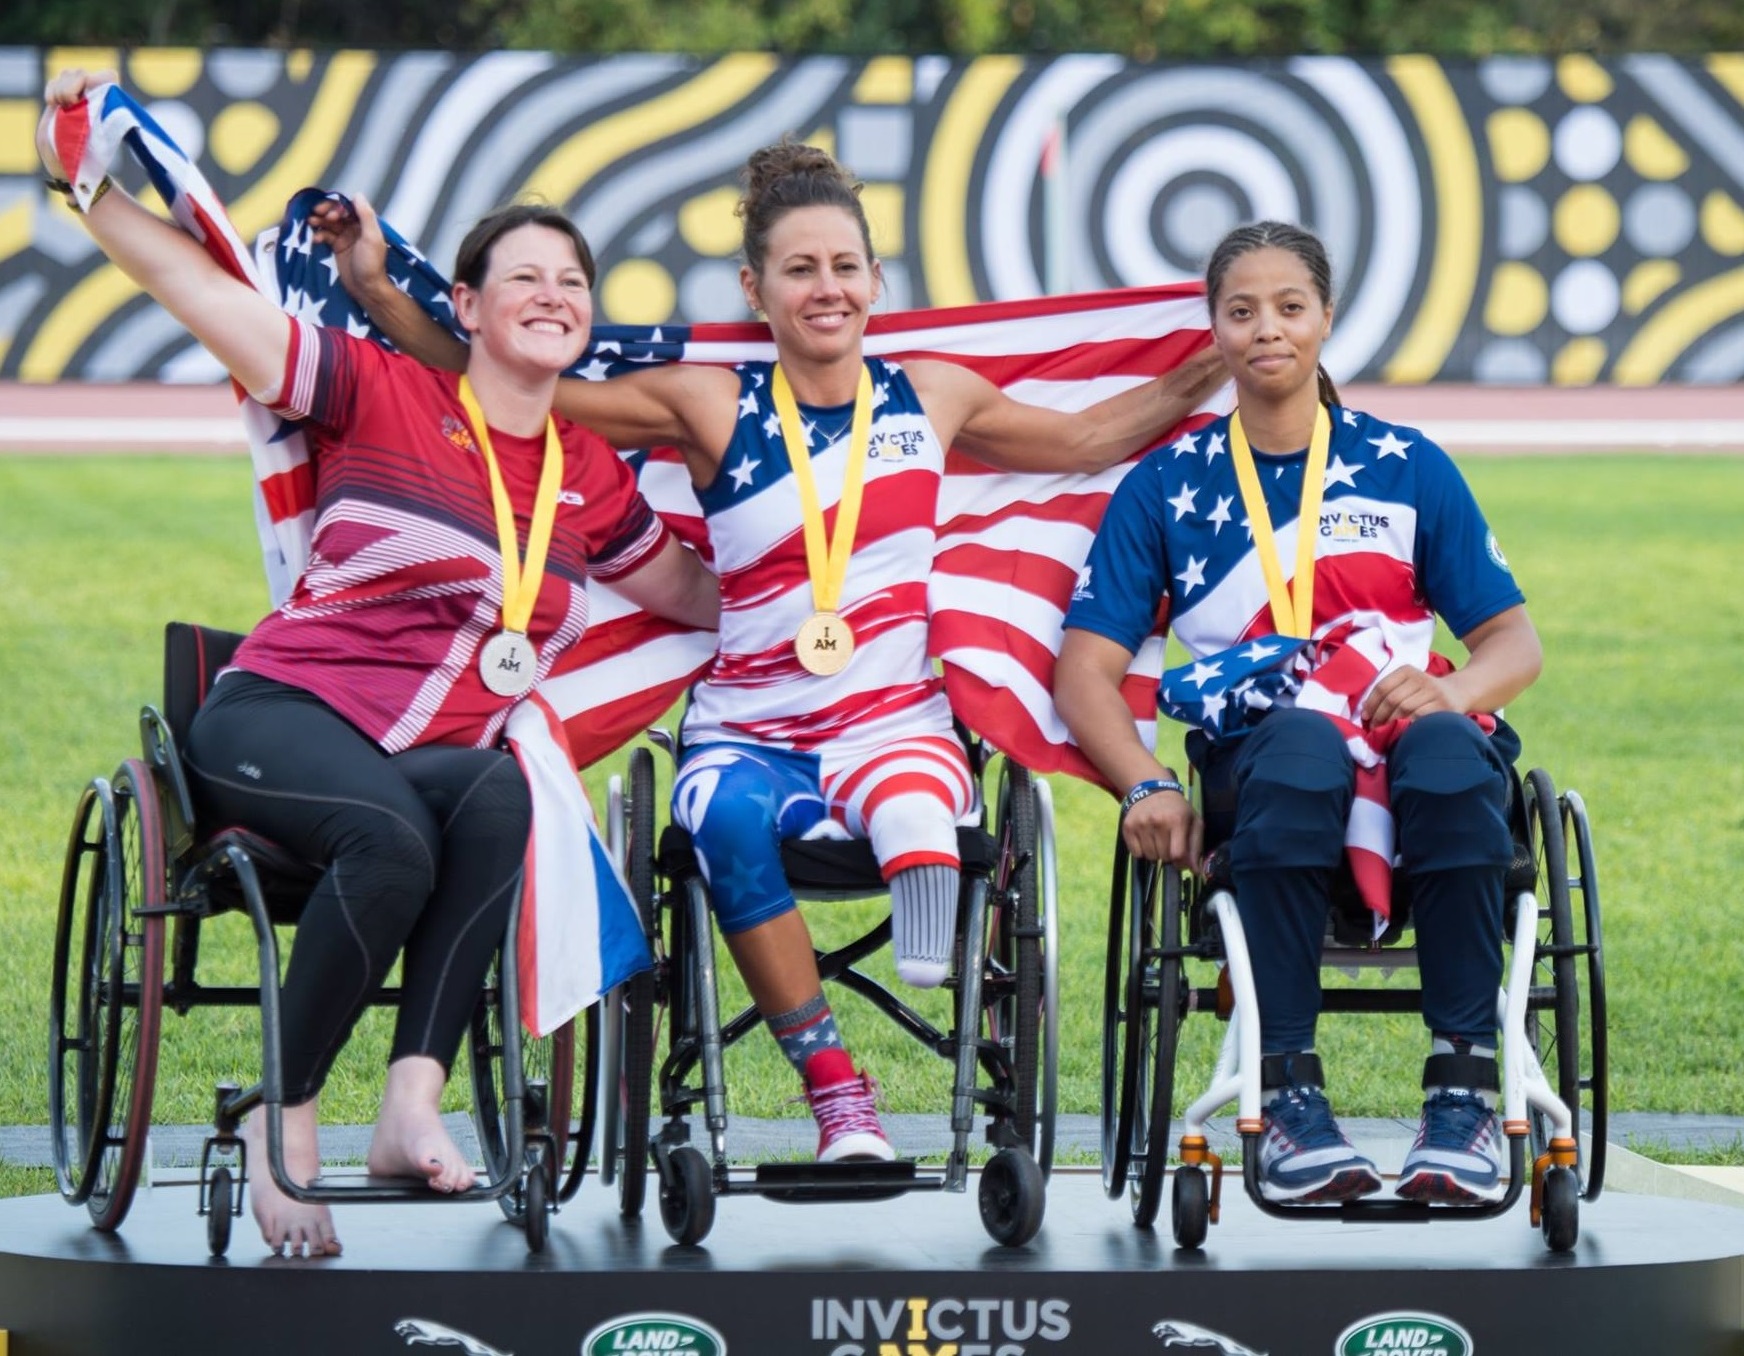 Three American woman on Invictus games podium wearing gold, silver and bronze medals